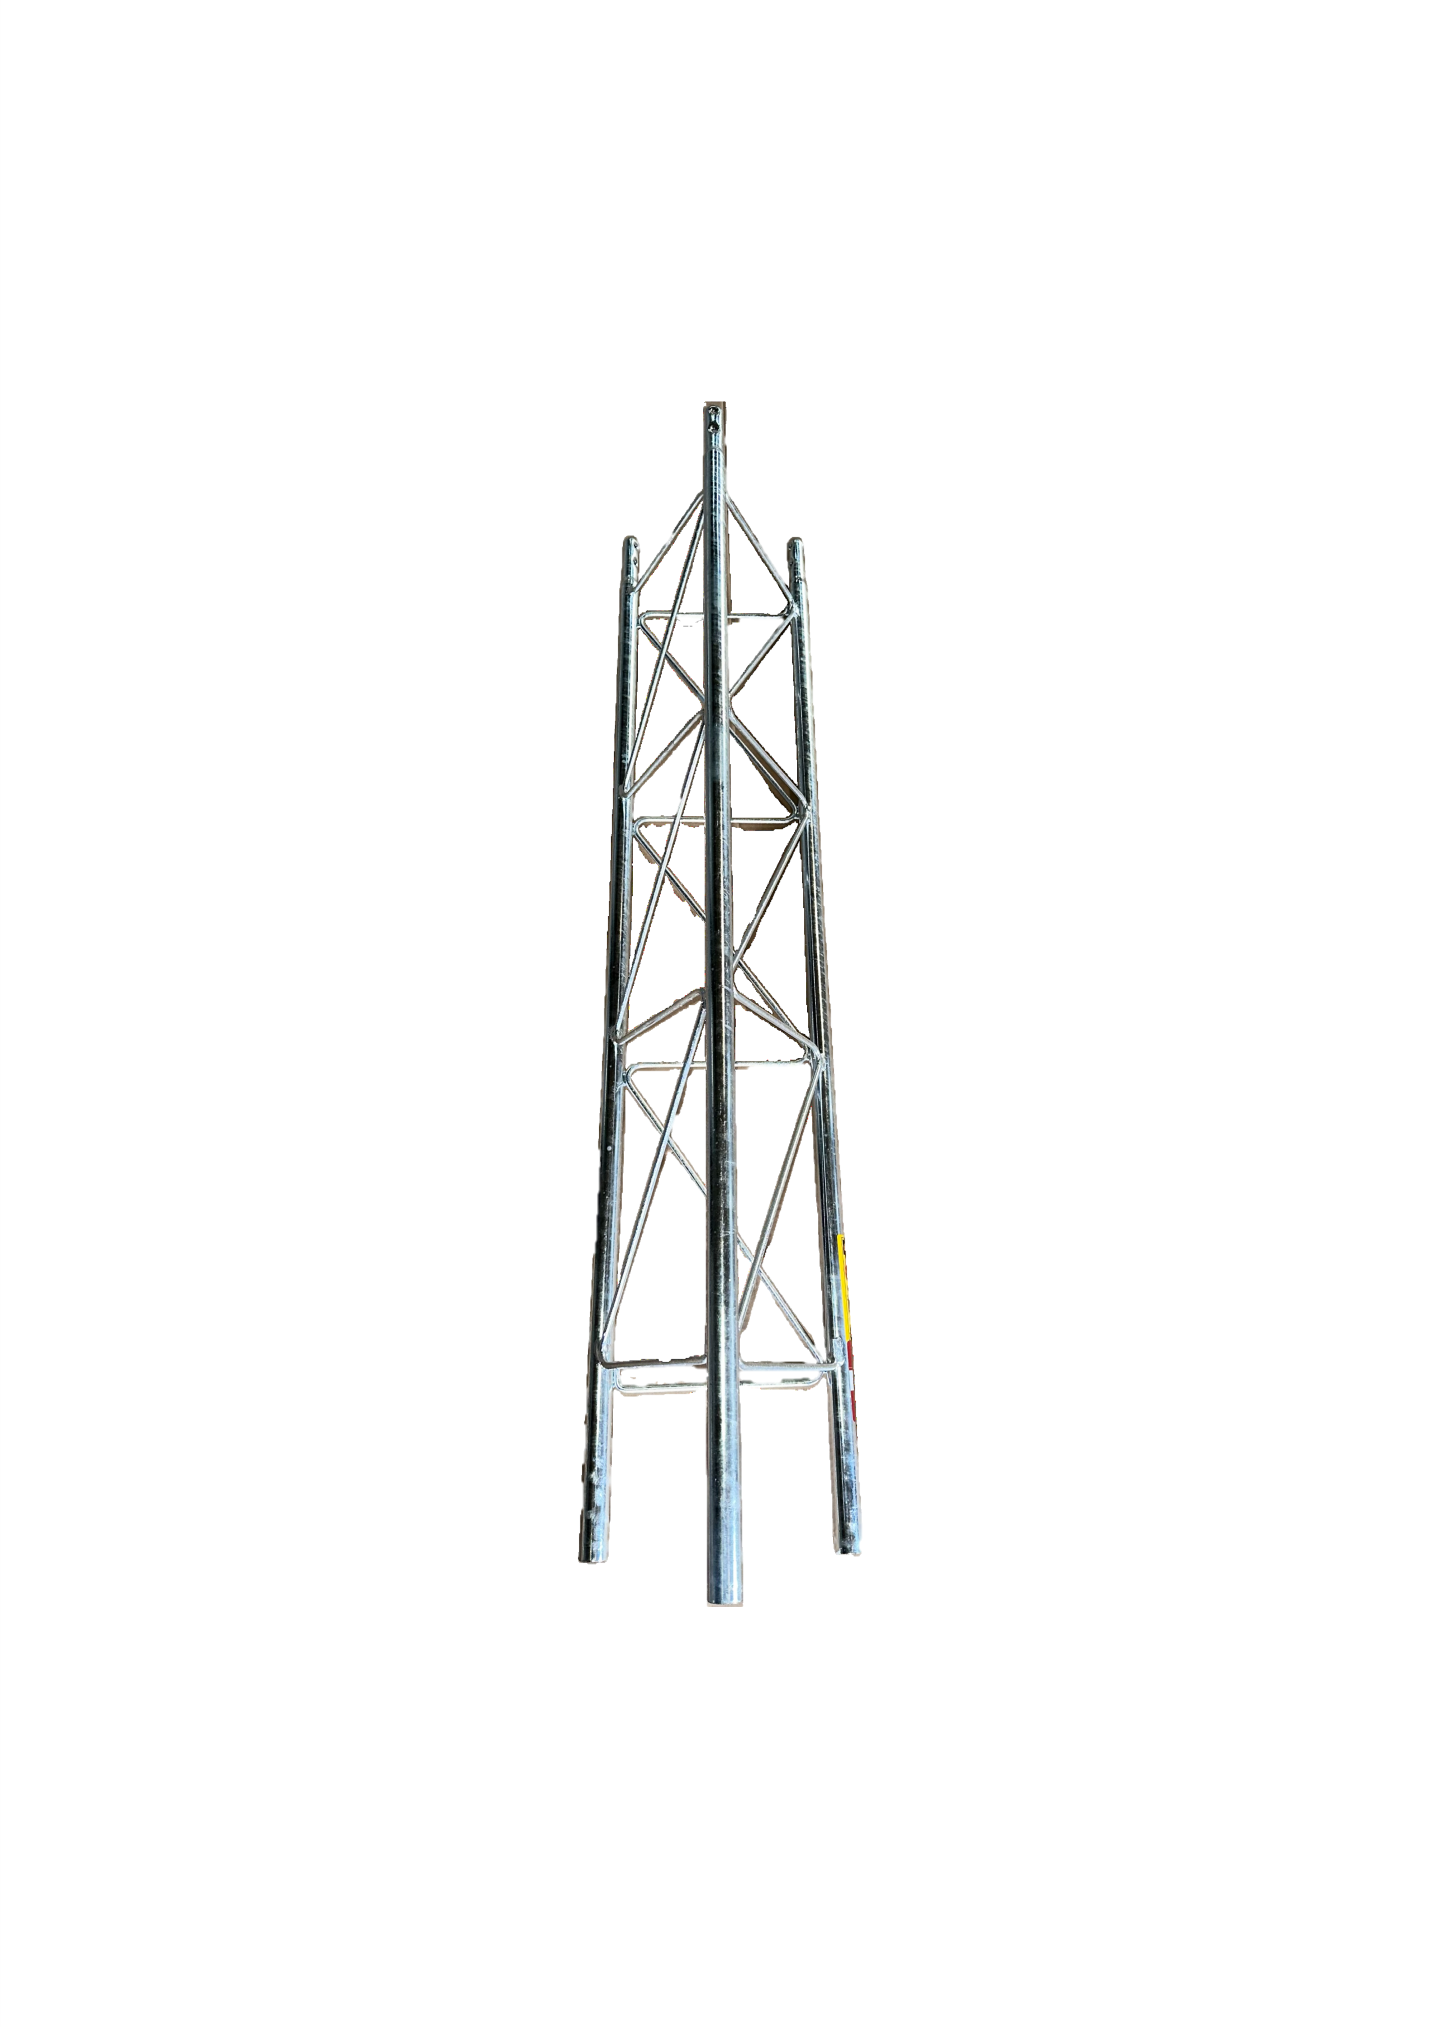 Amerite 25 Series 5 foot Tower Base Section